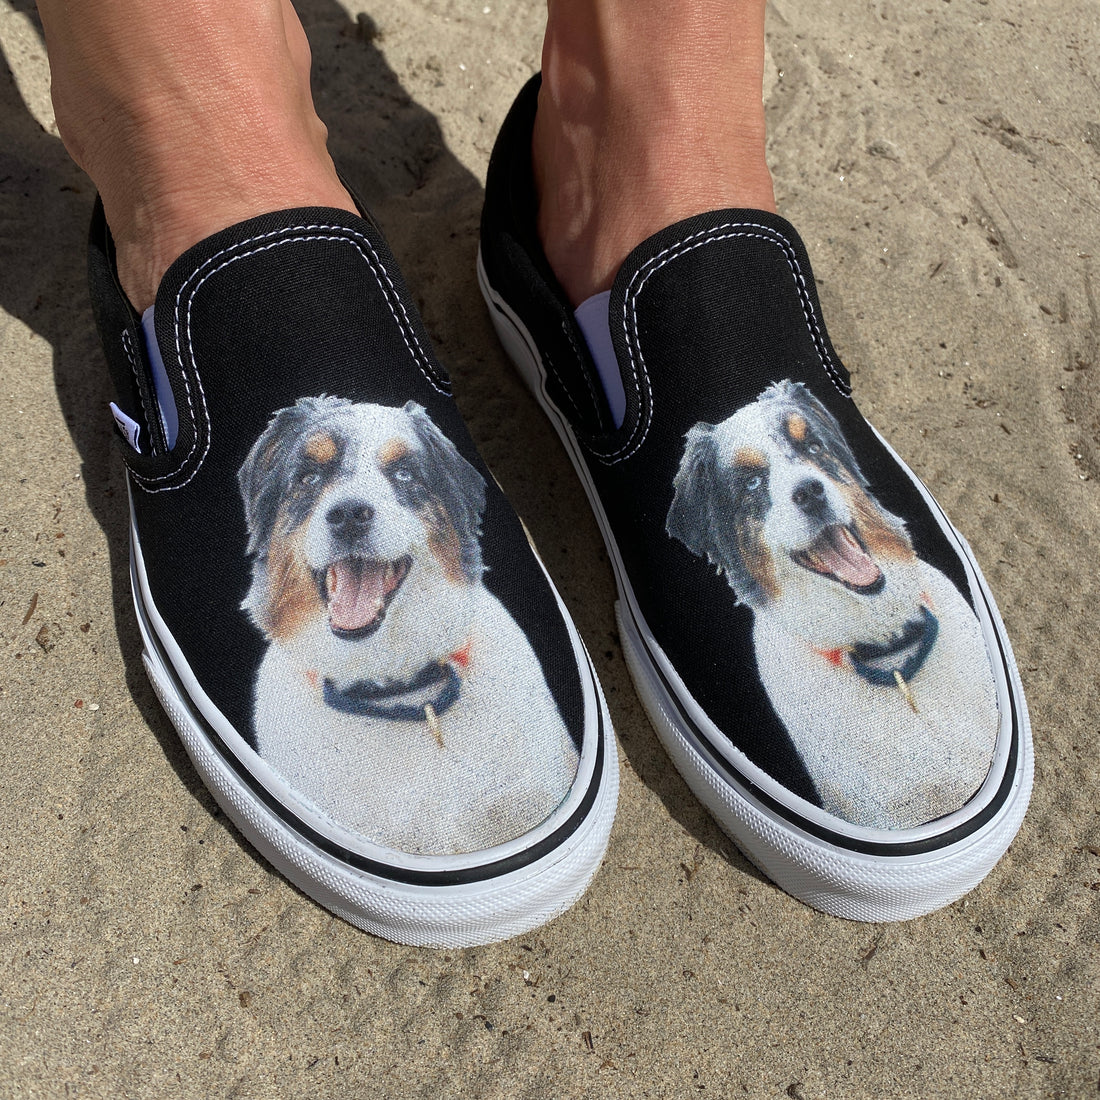 Small Business Giveaway with OC Pet Care! - Custom Printed Pet Shoes